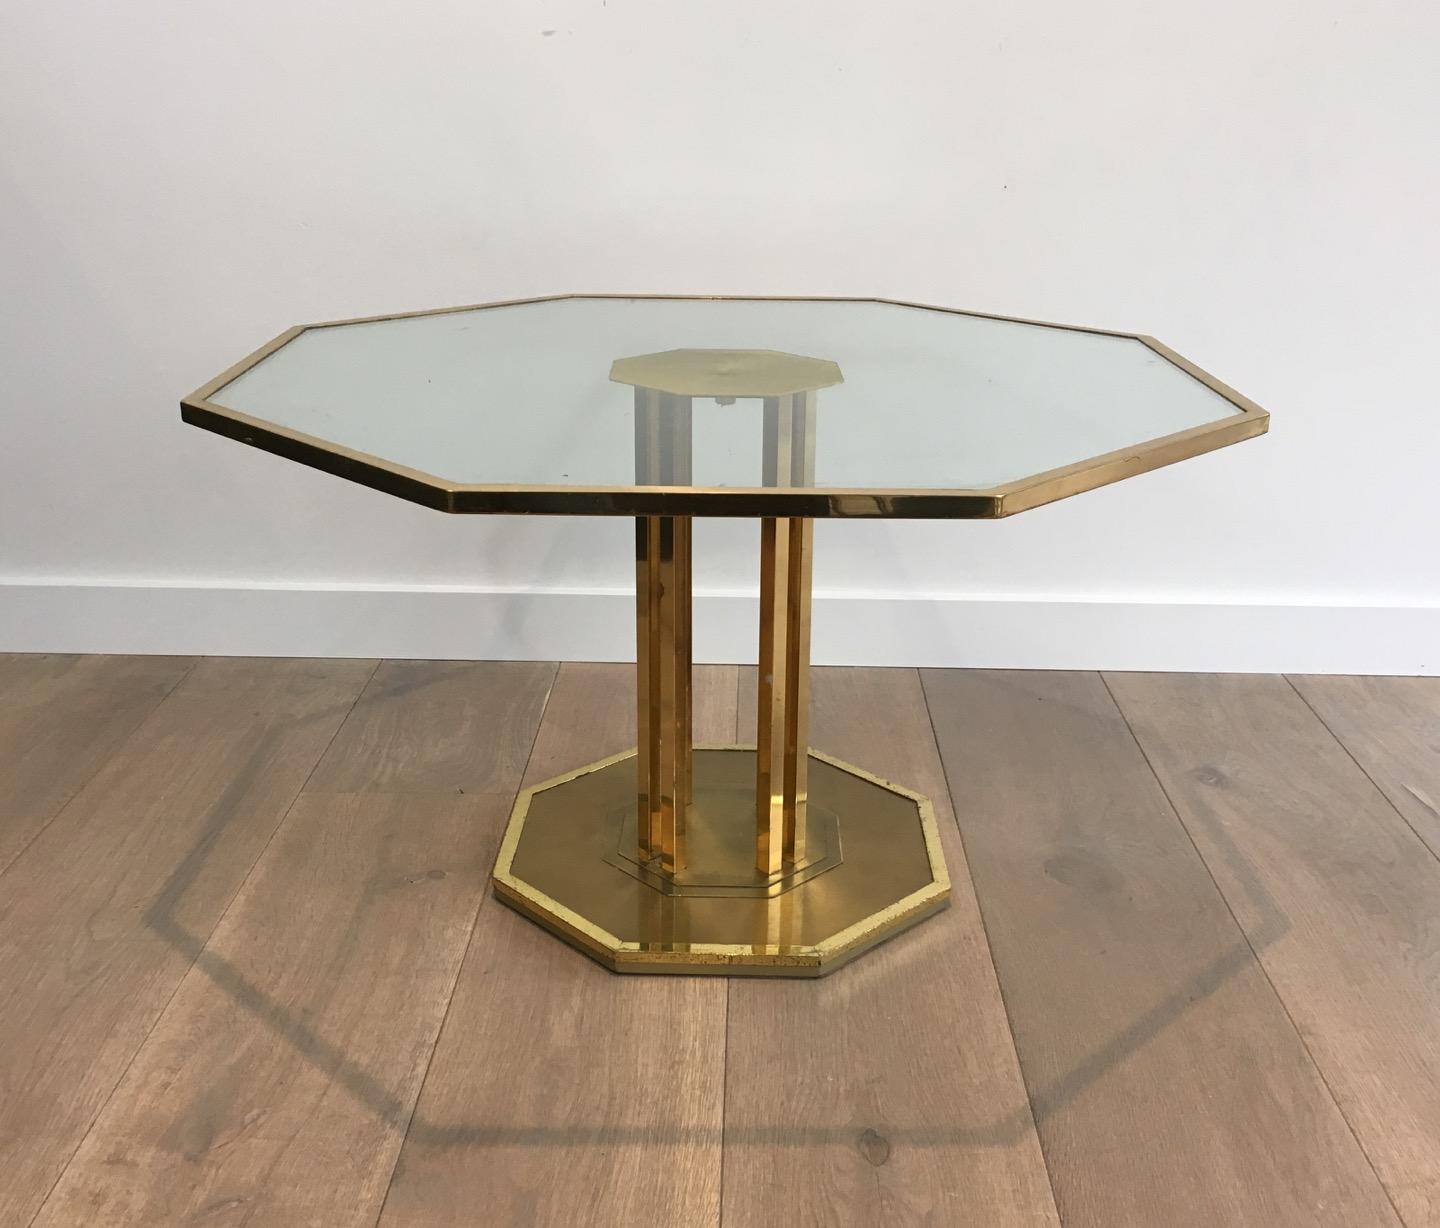 Rare Octagonal Brass and Glass Design Coffee Table, French, circa 1970 In Good Condition For Sale In Marcq-en-Barœul, Hauts-de-France